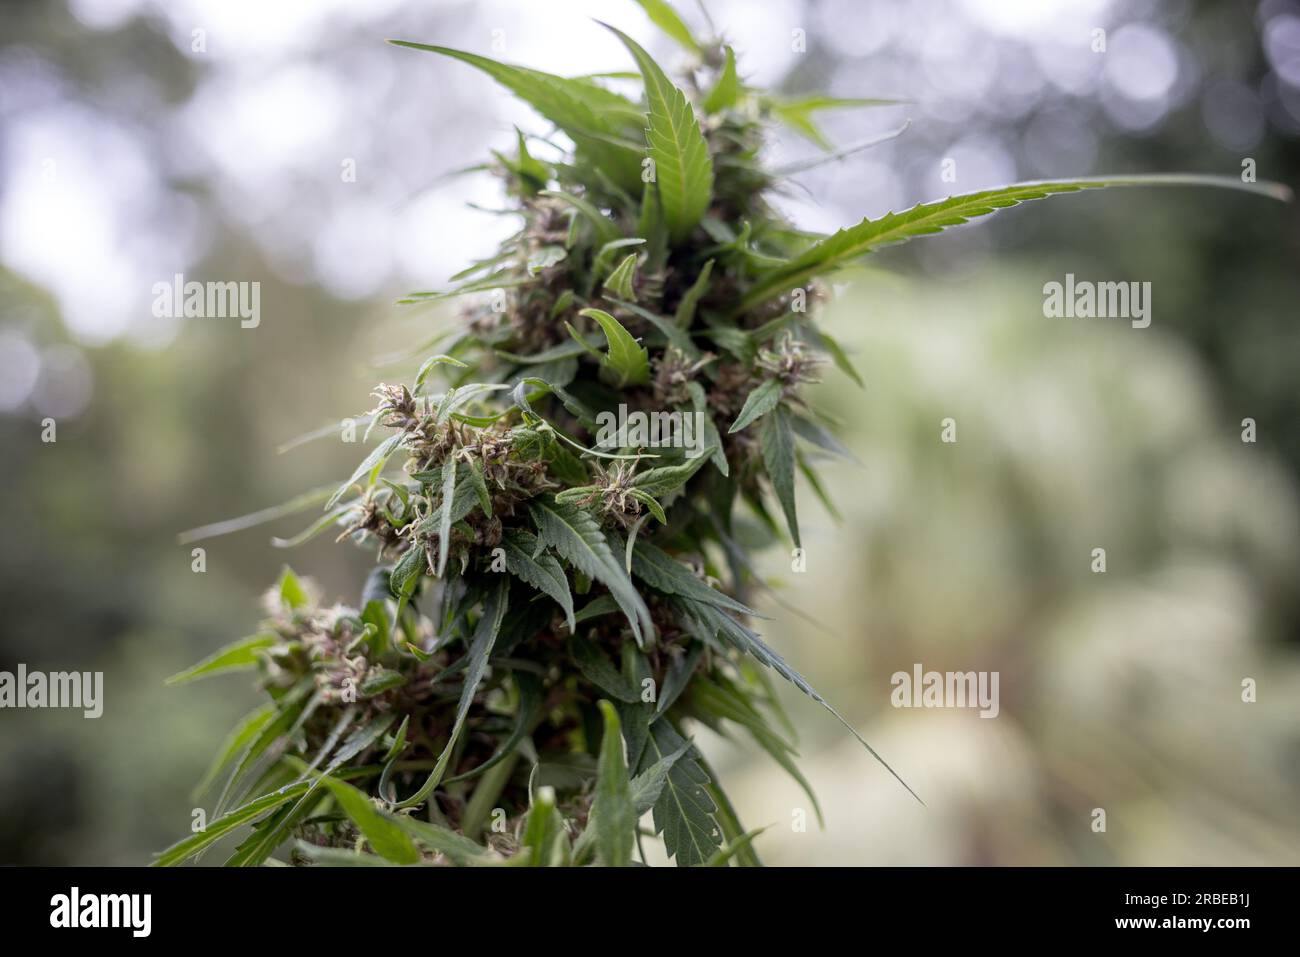 Marijuana, Scales, Jambs and a Cannabis Grinder Weed on a Black Wooden  Table Top Top View Stock Image - Image of weed, growth: 108124981